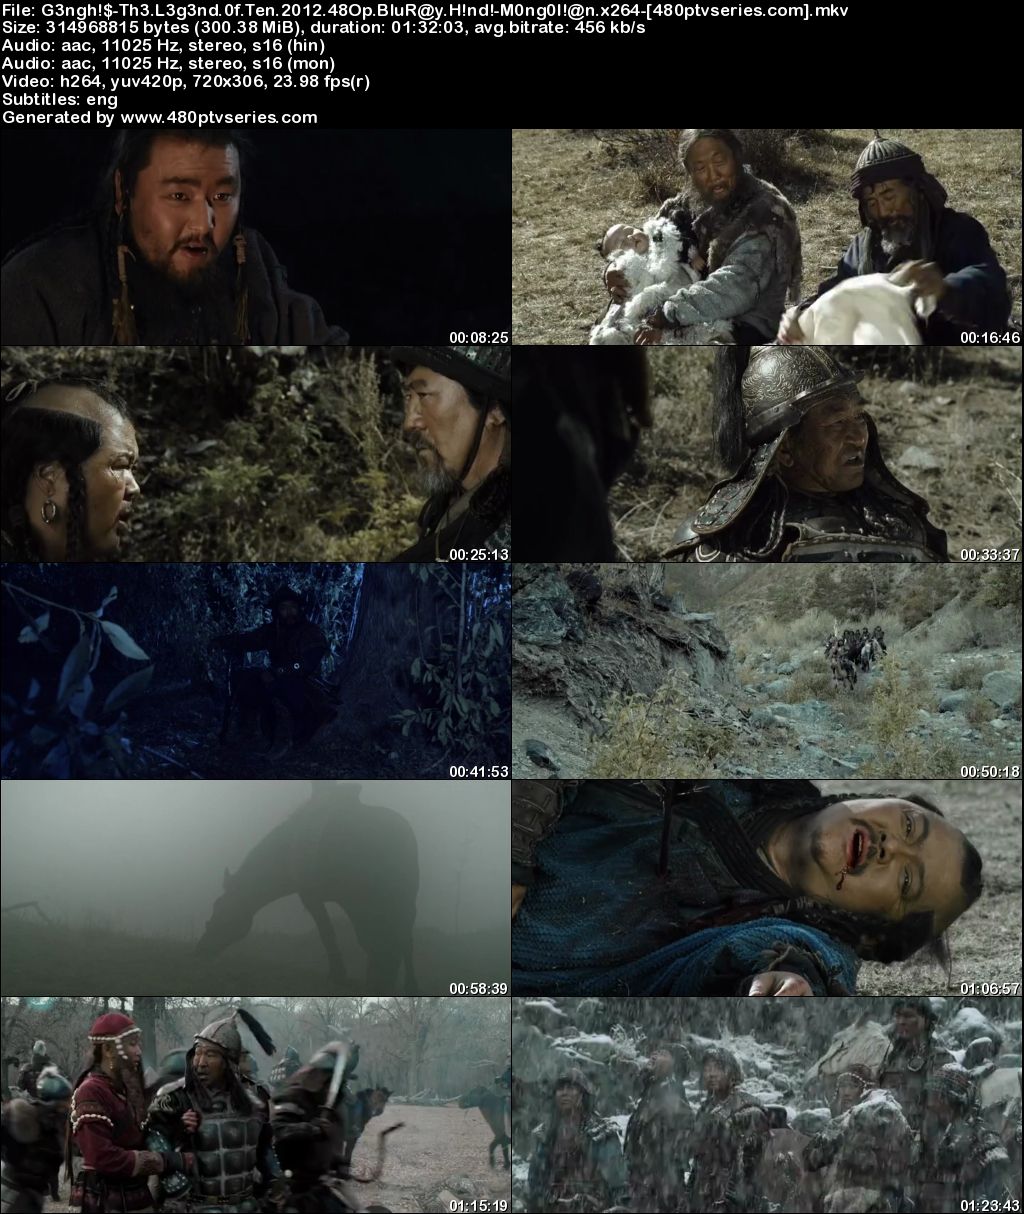 Genghis: The Legend of the Ten (2012) 300MB Full Hindi Dual Audio Movie Download 480p BluRay Free Watch Online Full Movie Download Worldfree4u 9xmovies